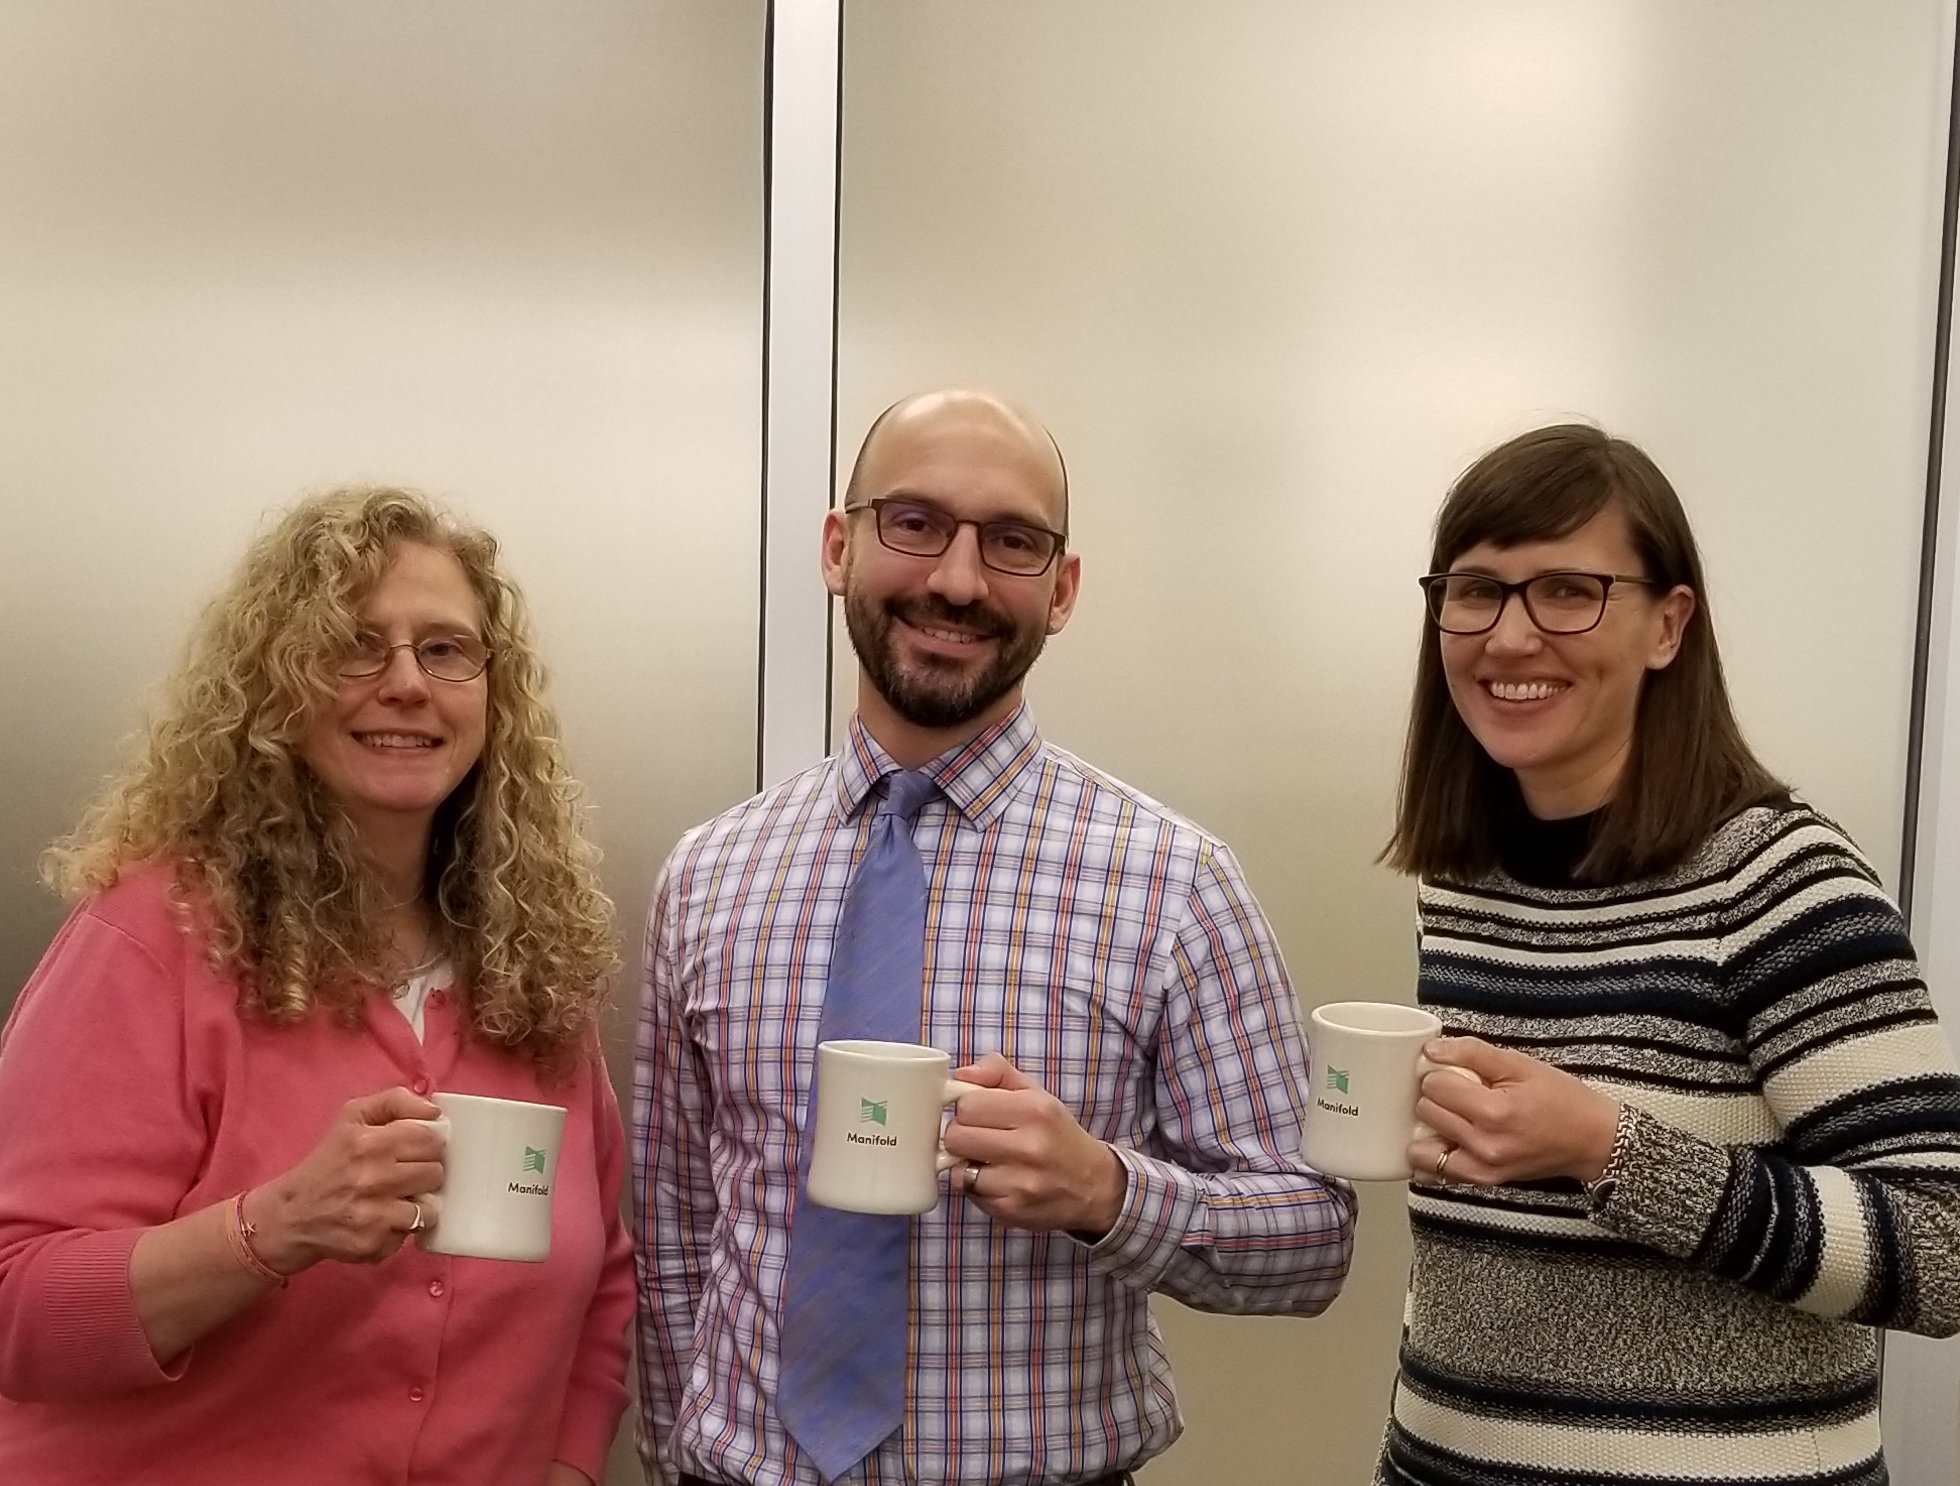 Group photo of Mary Rose Muccie, Terence Smyre, and Annie Johnson holding Manifold mugs, smiling